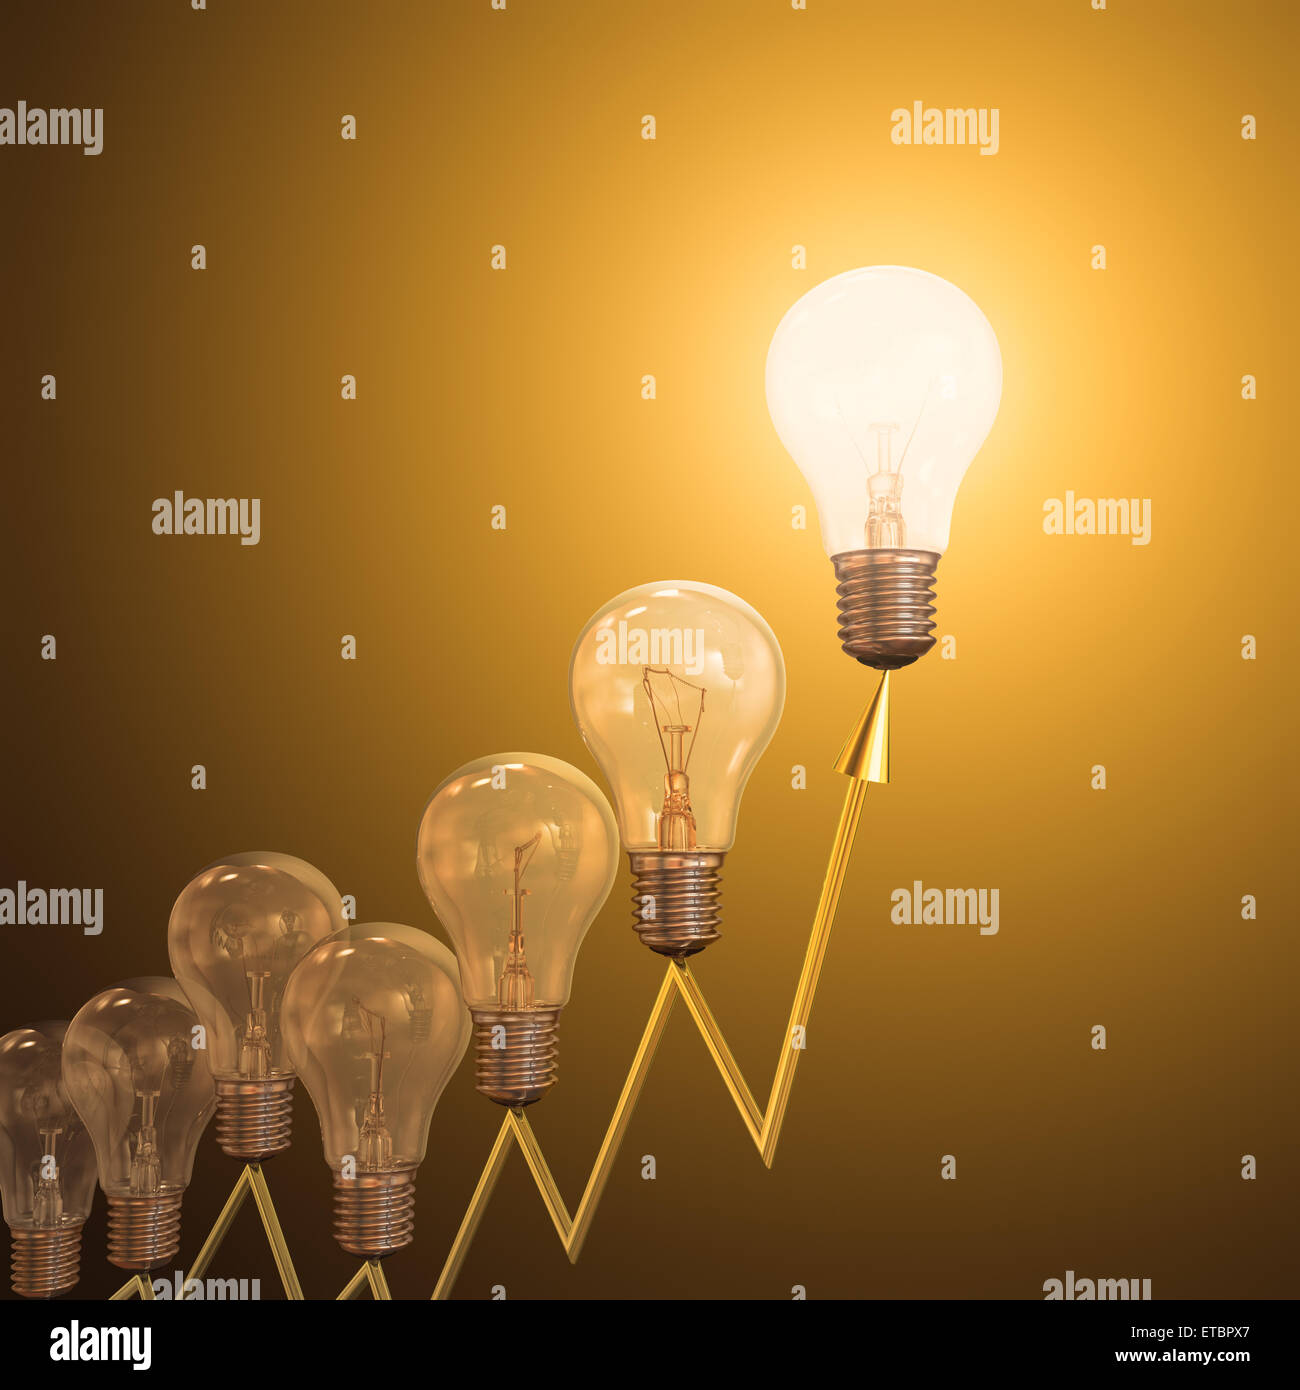 Graphic on high prices of electricity. Energy image concept. Stock Photo